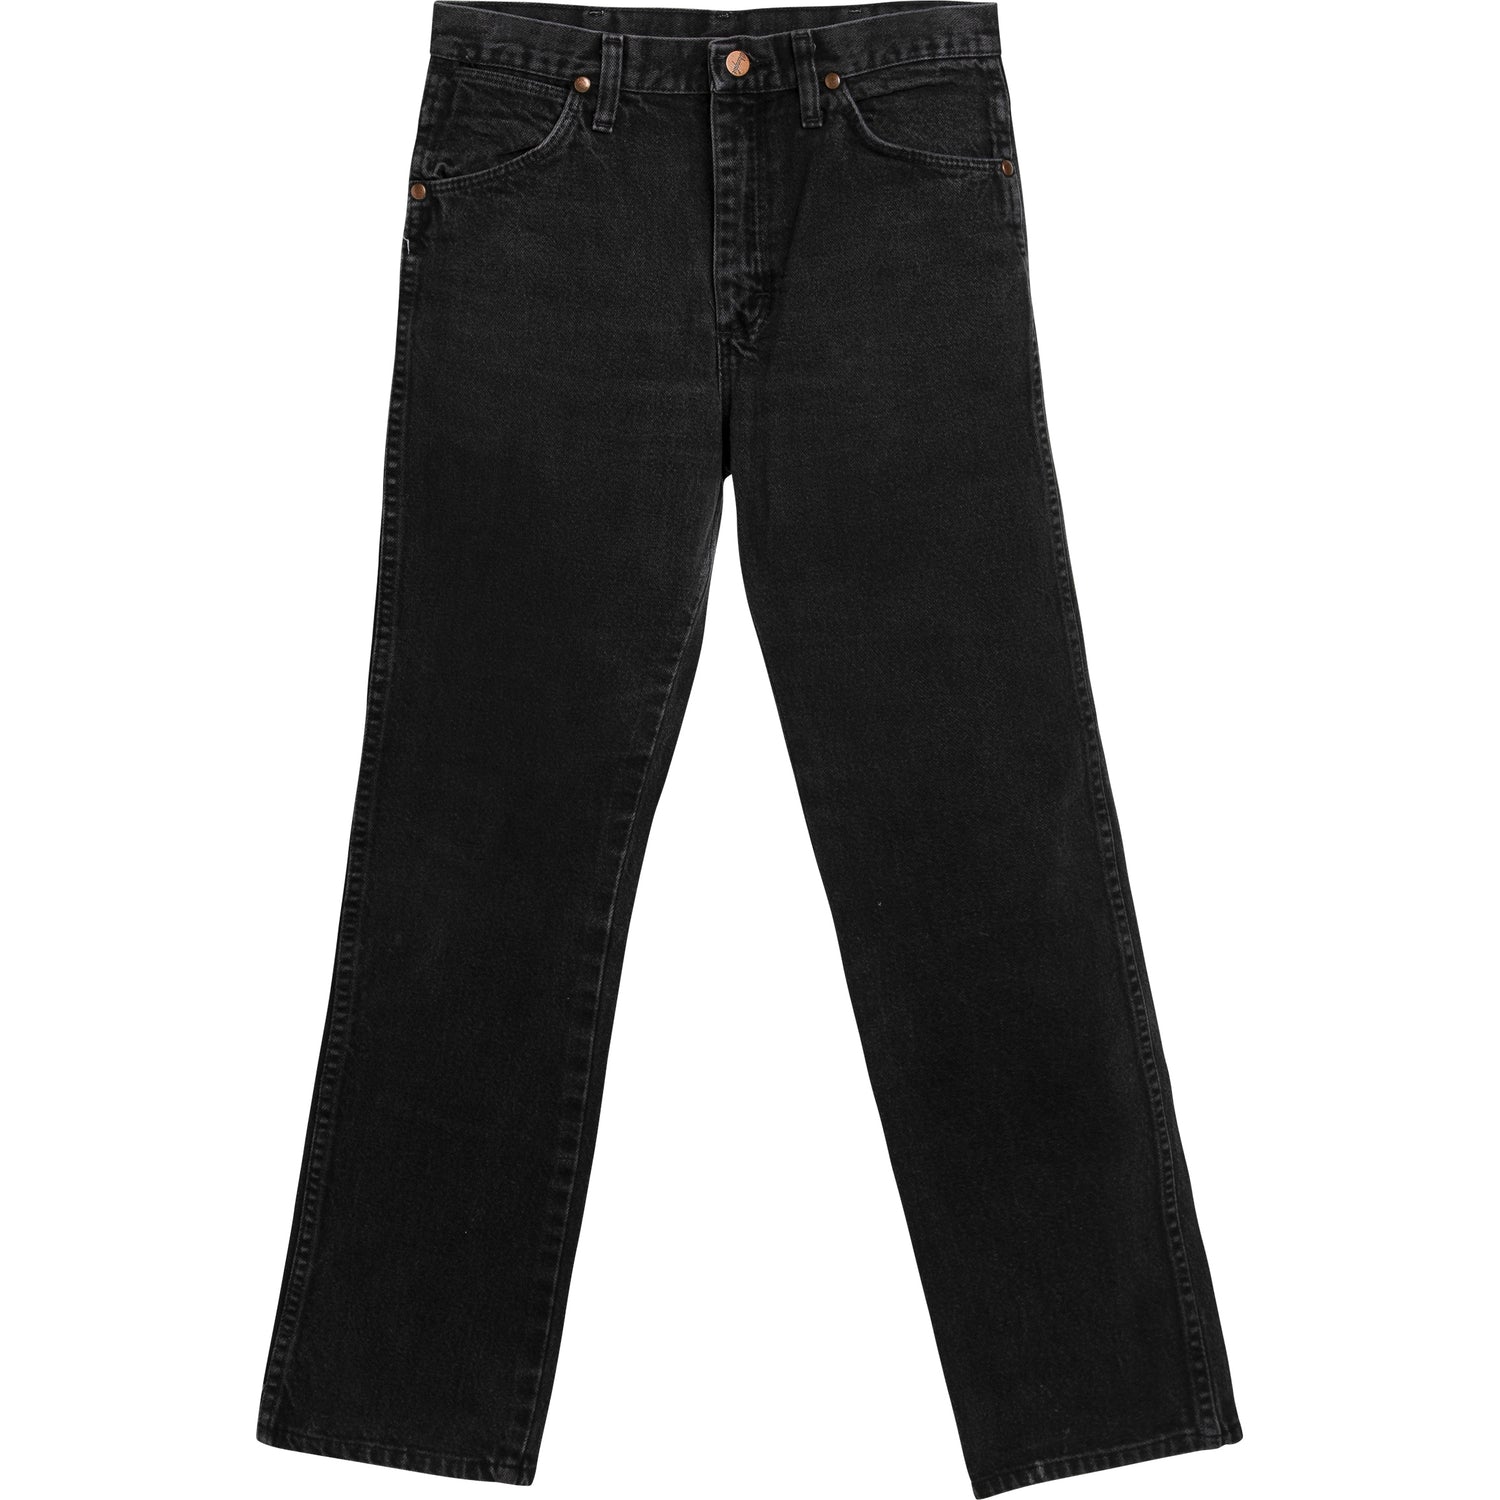 VINTAGE WRANGLER JEANS - MORE SIZES AVAILABLE